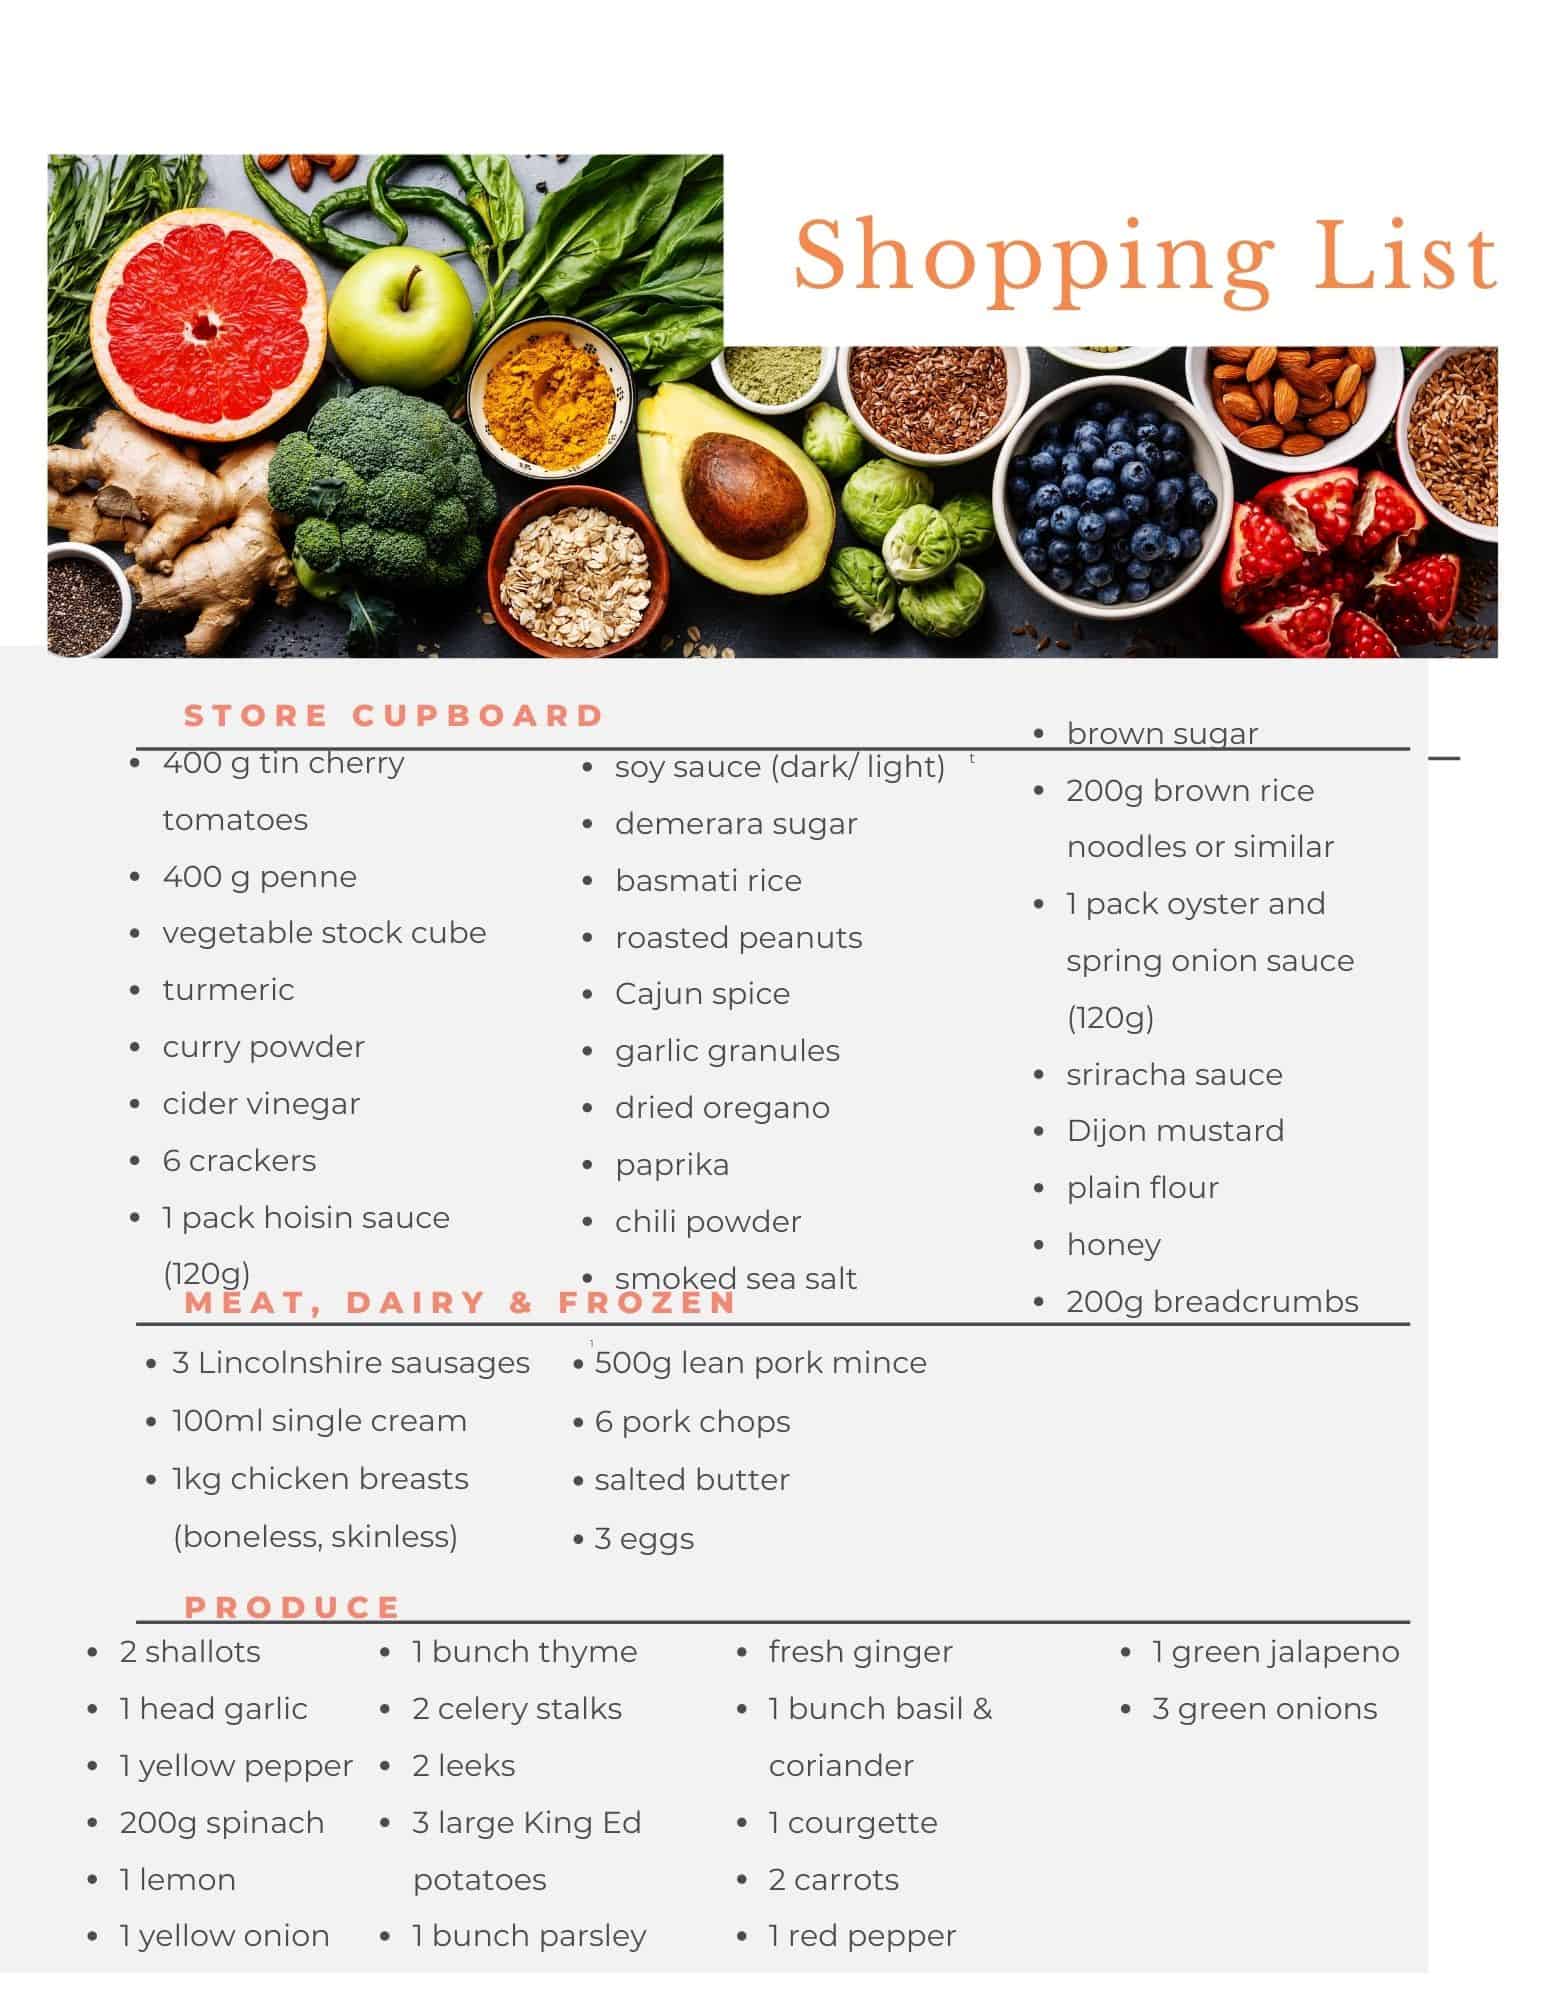 30 Minute Aldi budget meal plan free shopping list.